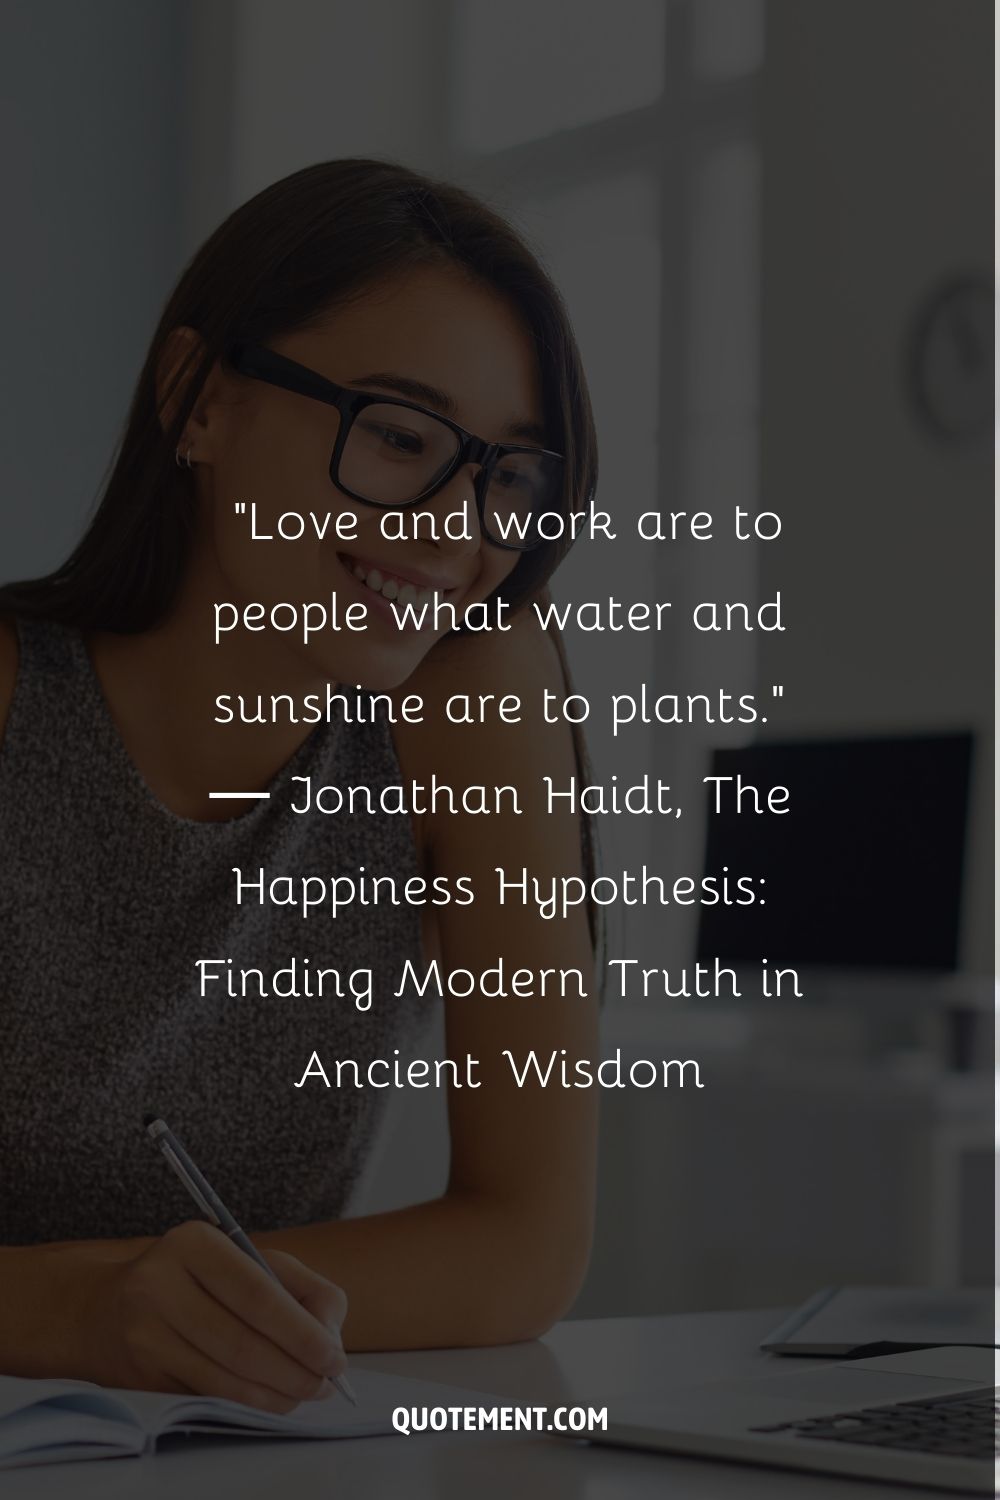 “Love and work are to people what water and sunshine are to plants.” ― Jonathan Haidt, The Happiness Hypothesis Finding Modern Truth in Ancient Wisdom